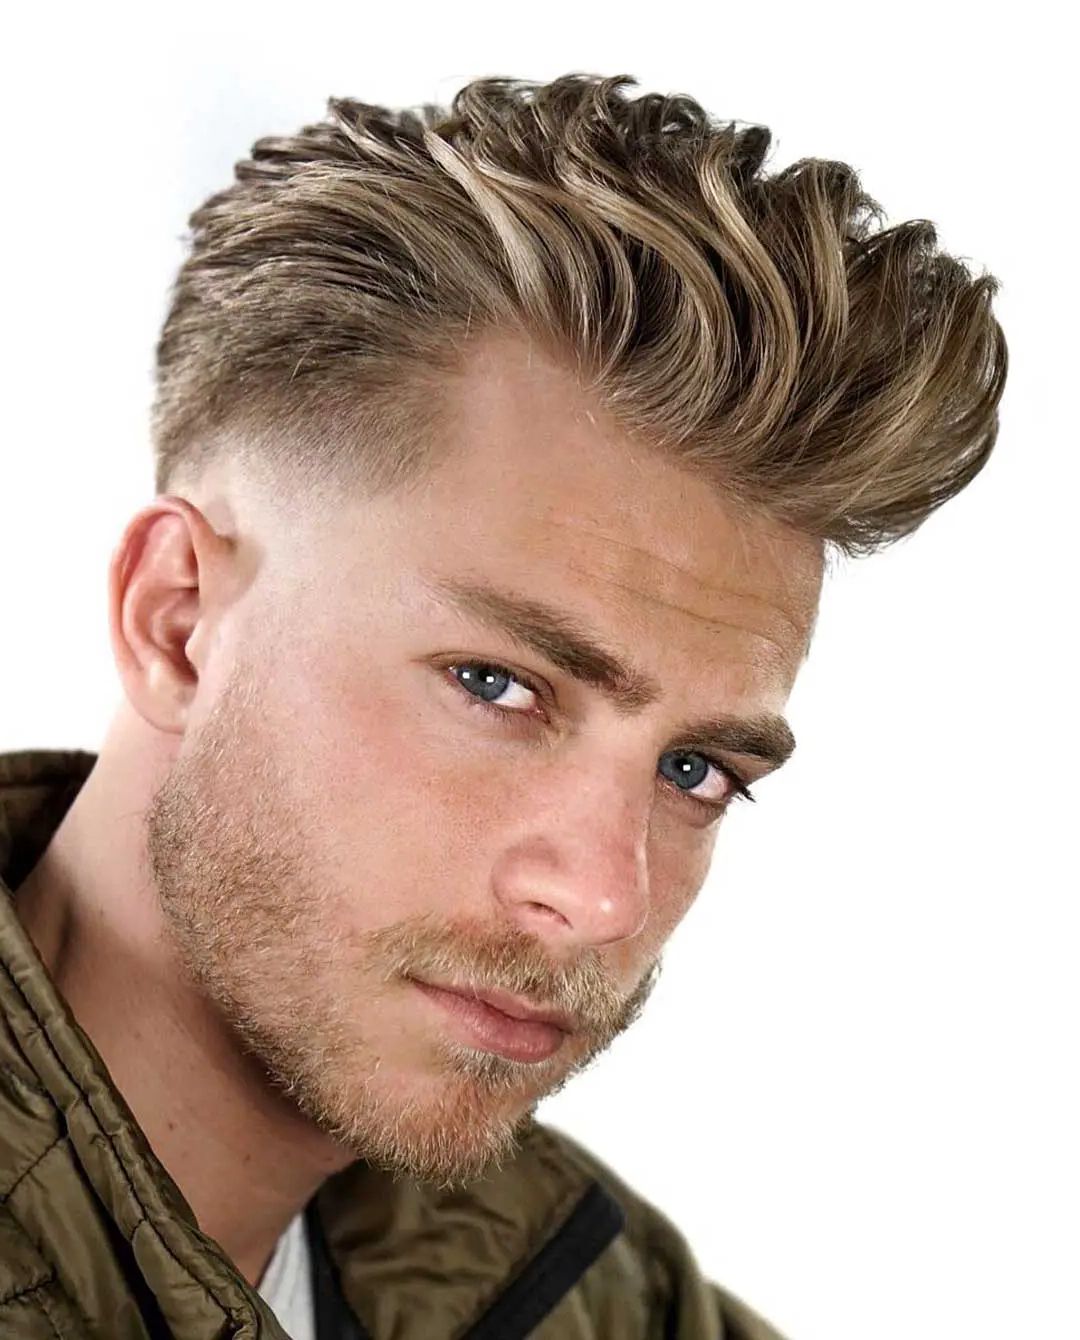 Well Known Textured Haircut With 20+ Textured Haircut Ideas For Men – Men's Hairstyle Tips (View 9 of 20)